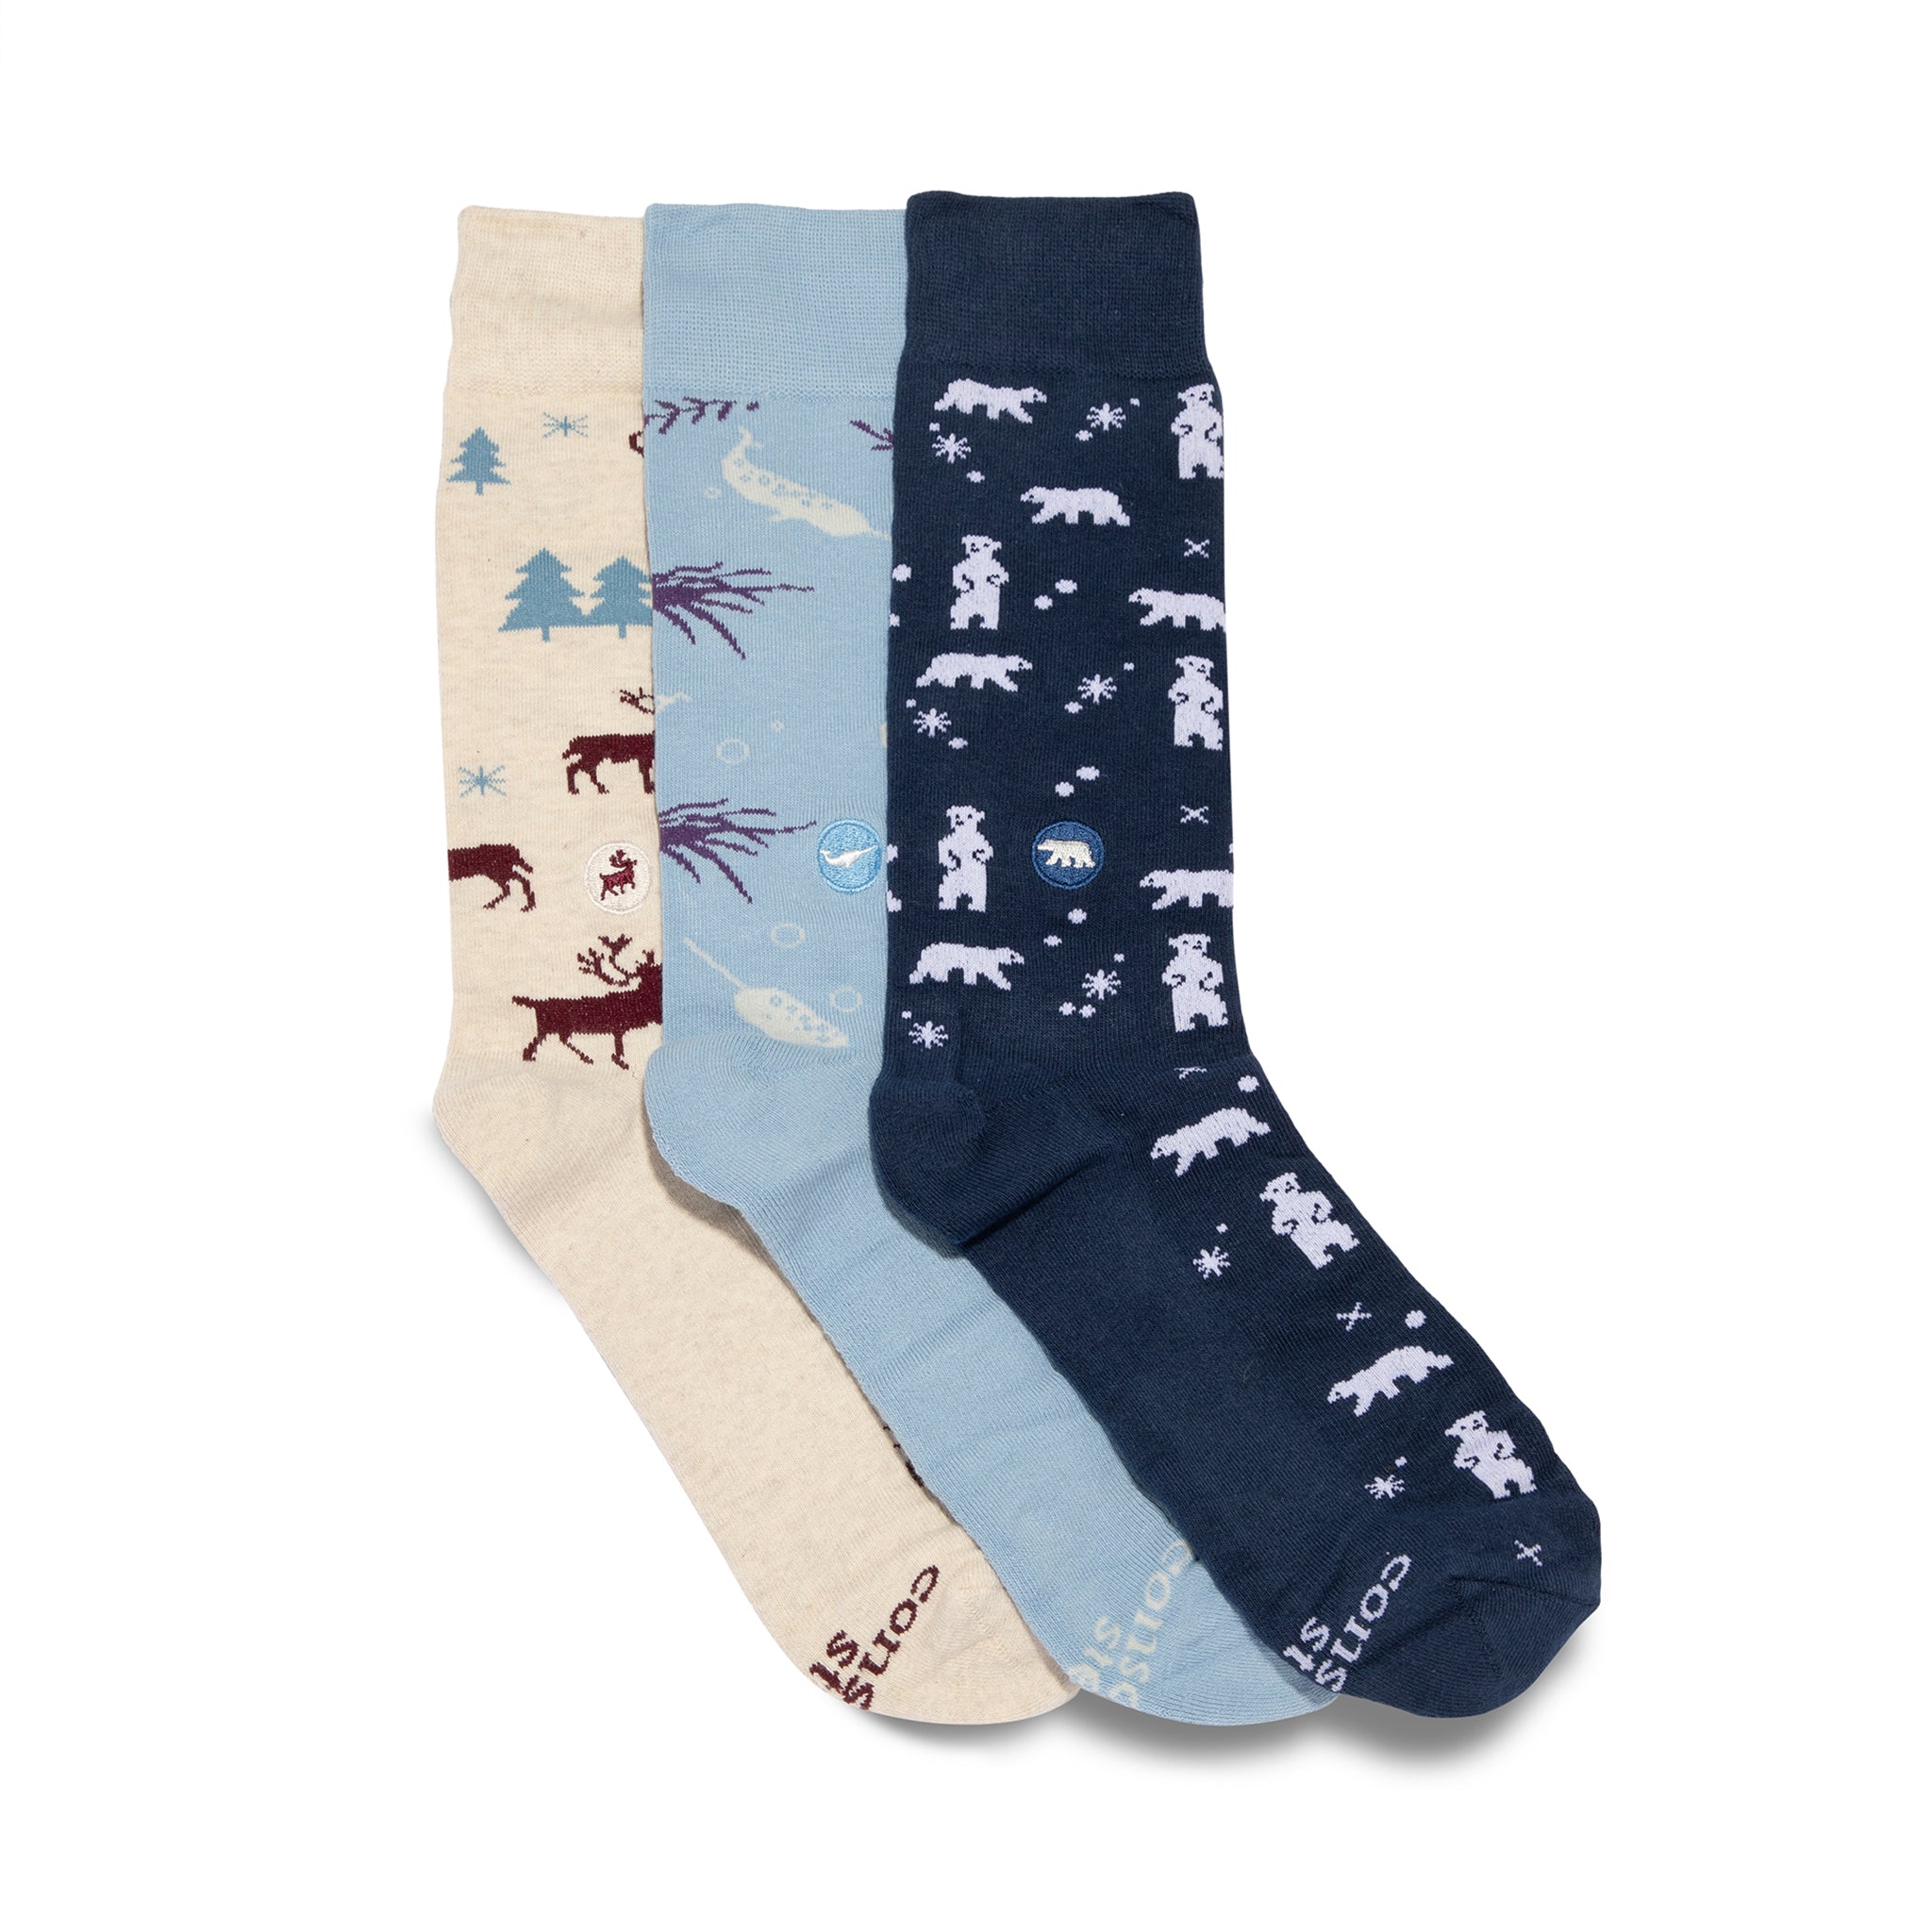 Gift Box of Socks that Protect the Arctic | Every Pair Gives Back ...